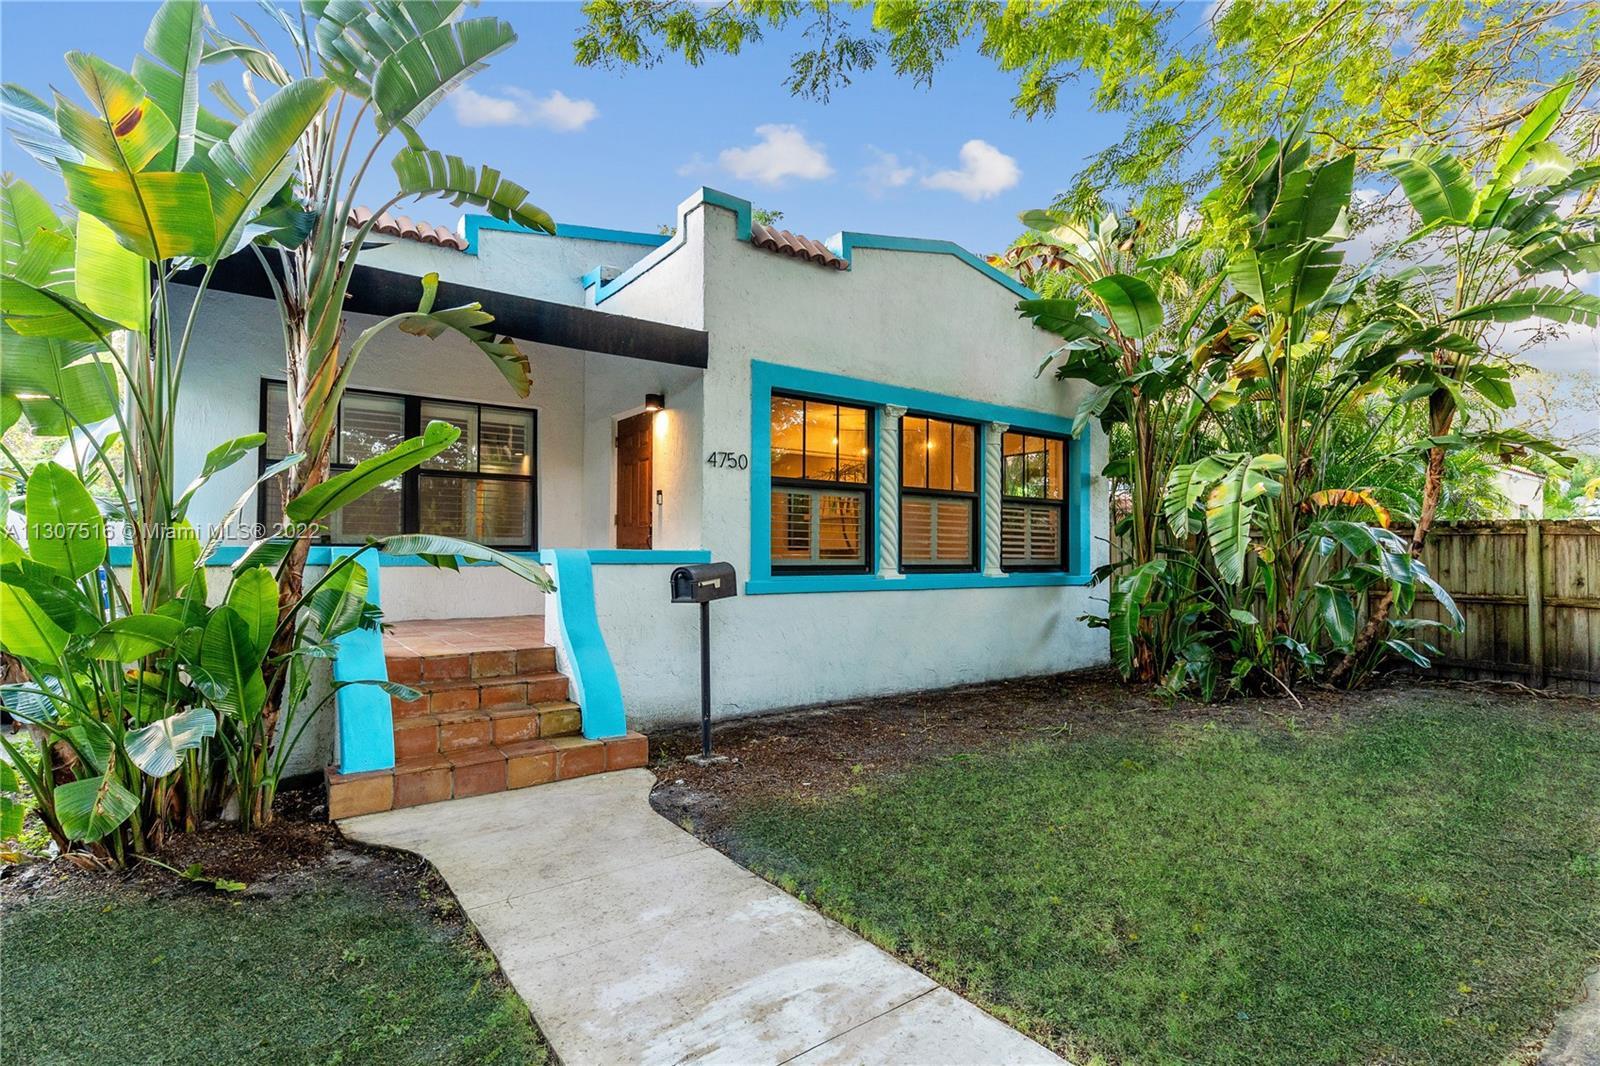 Introducing this organic modern home located in the heart of the historical neighborhood of Buena Vi